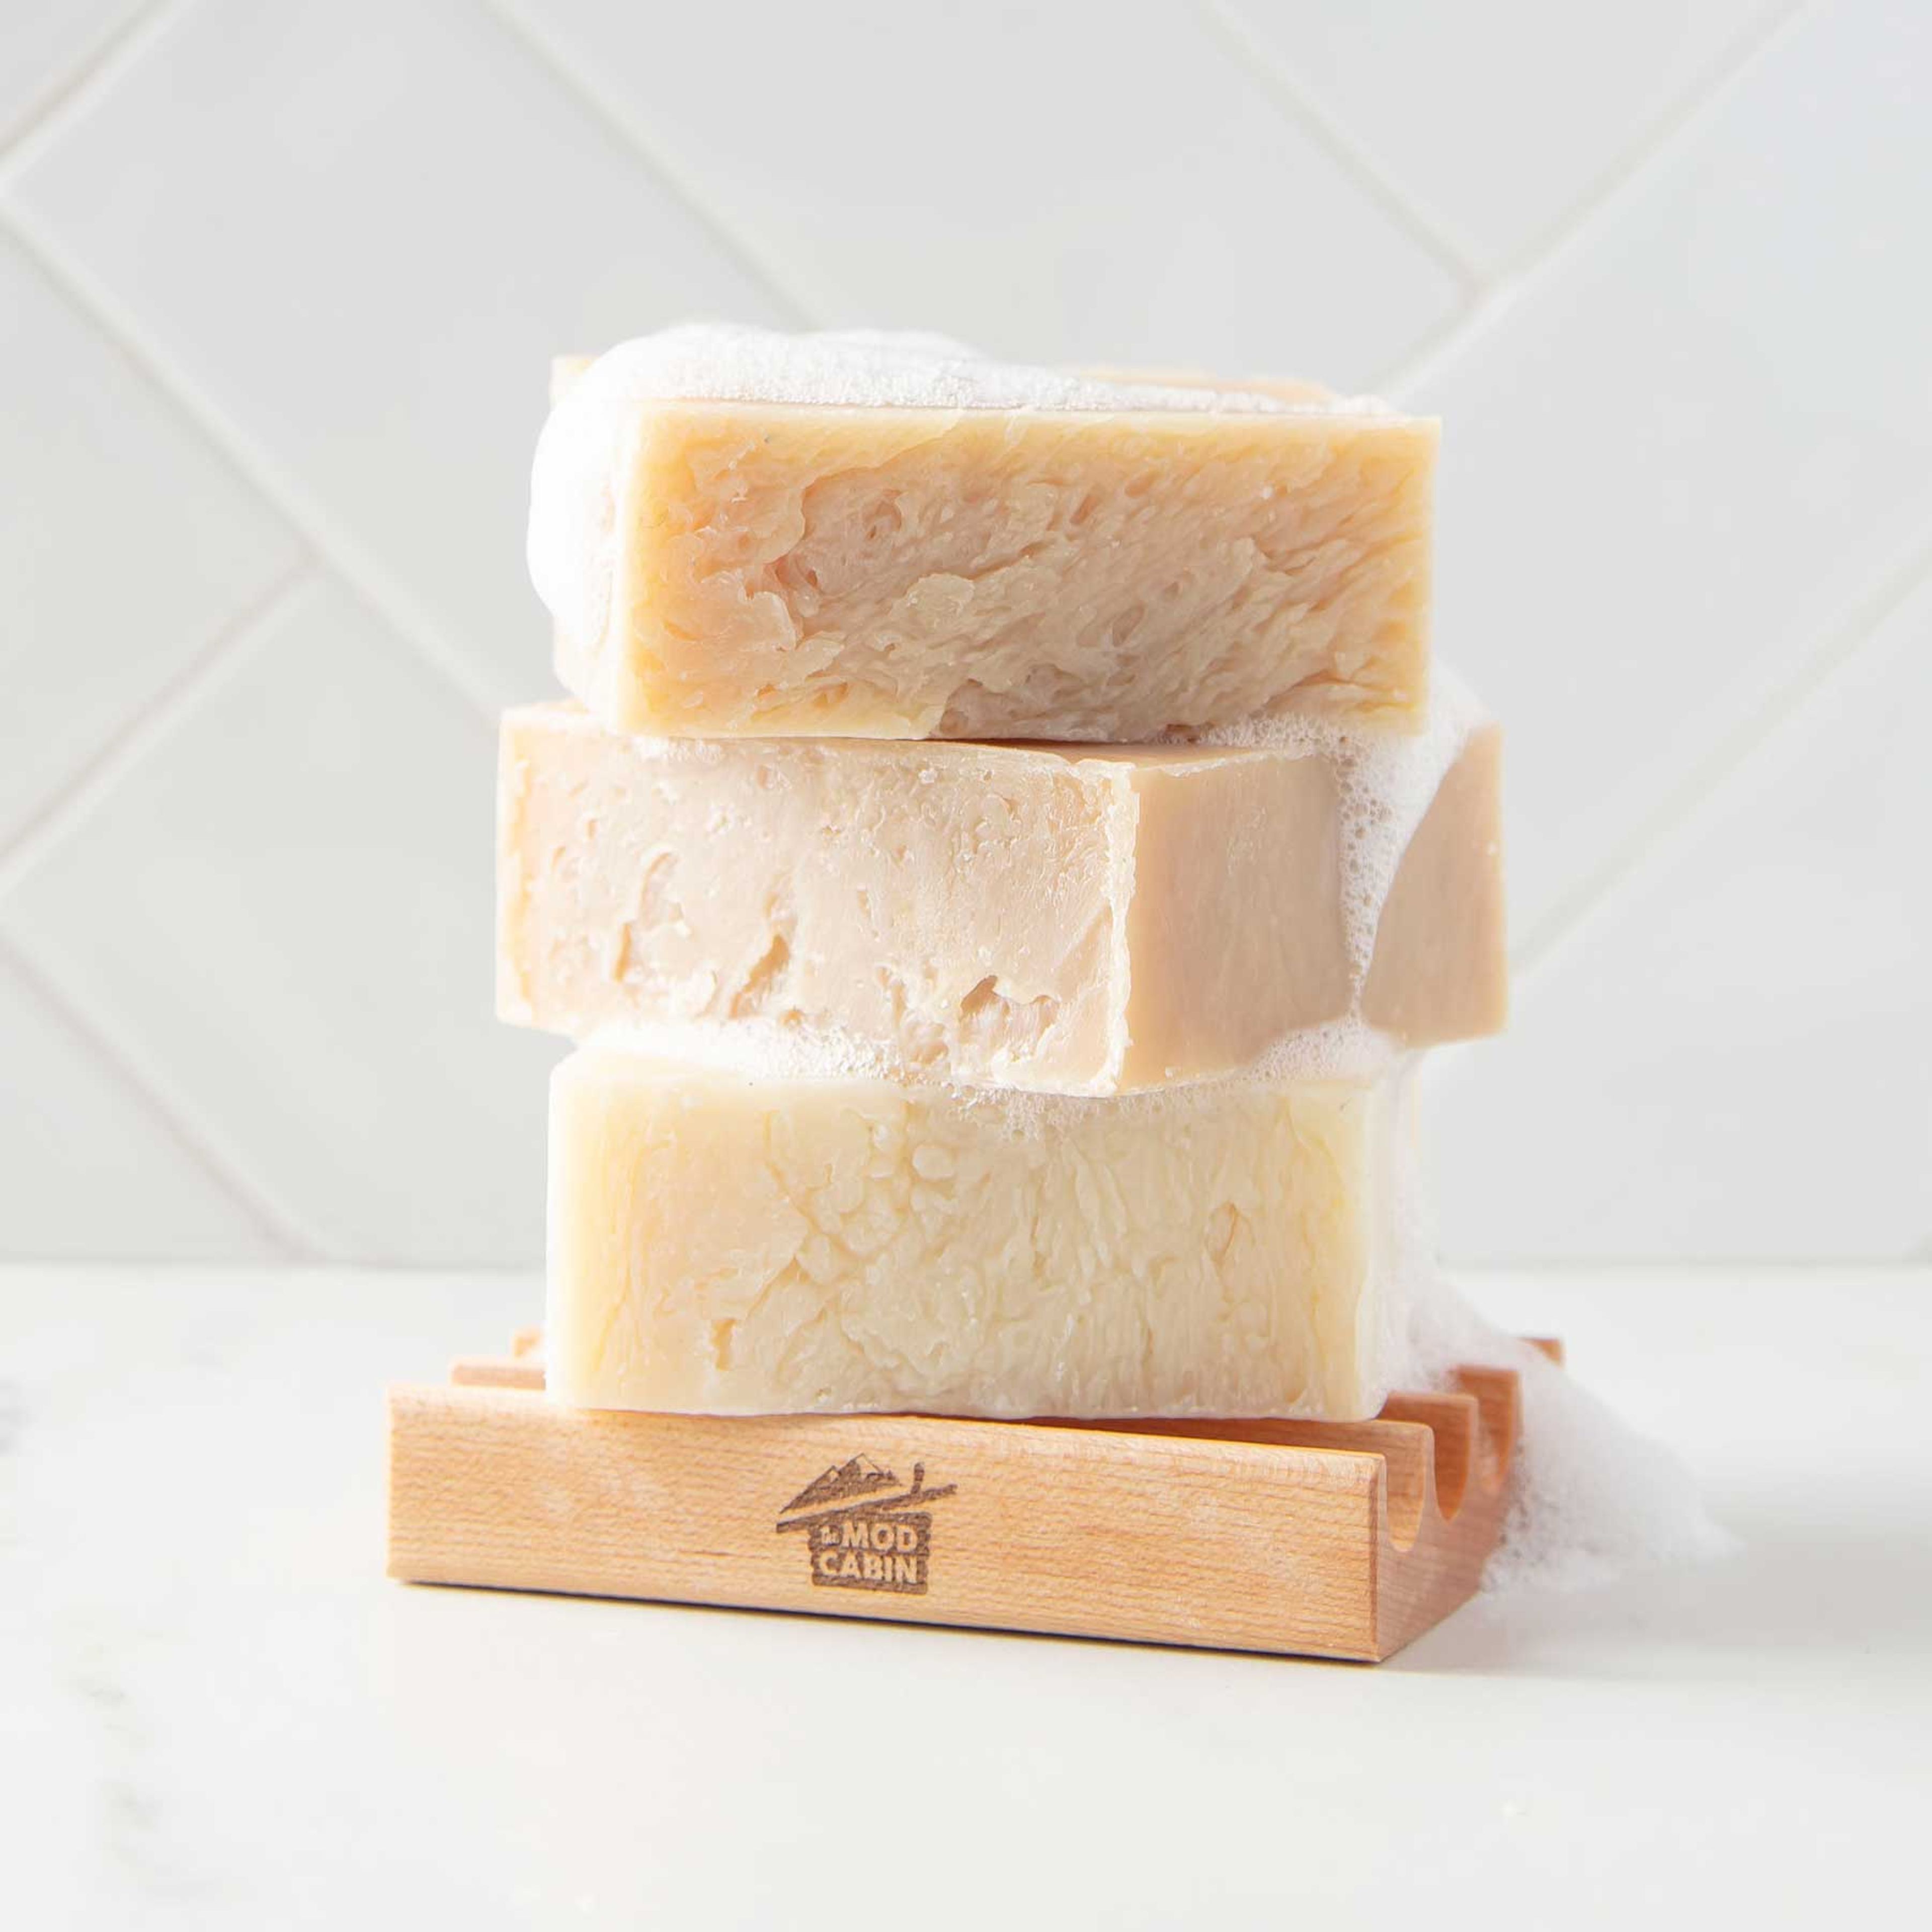 The Mod Cabin Soap 3-Pack